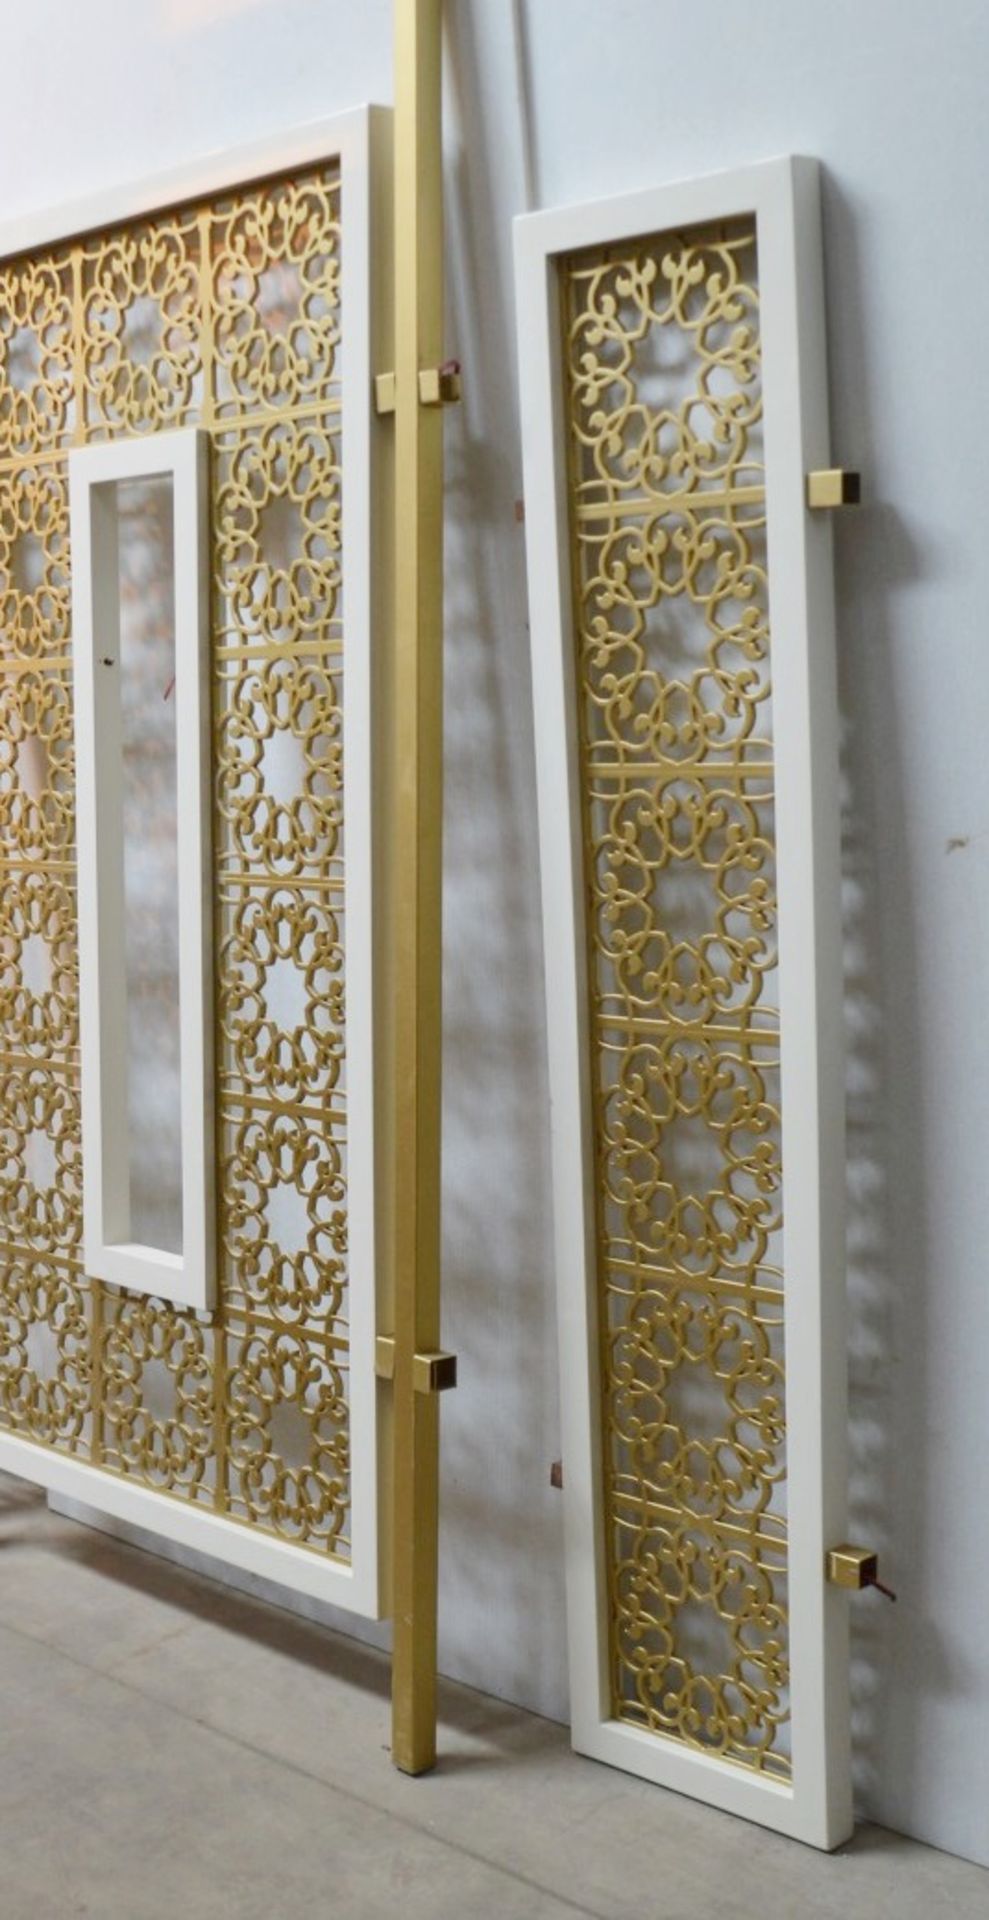 A Set Of 3 x Moroccan-style Room Divider Screen Panels - Ref: HMS108 - CL668 - Location: - Image 6 of 10